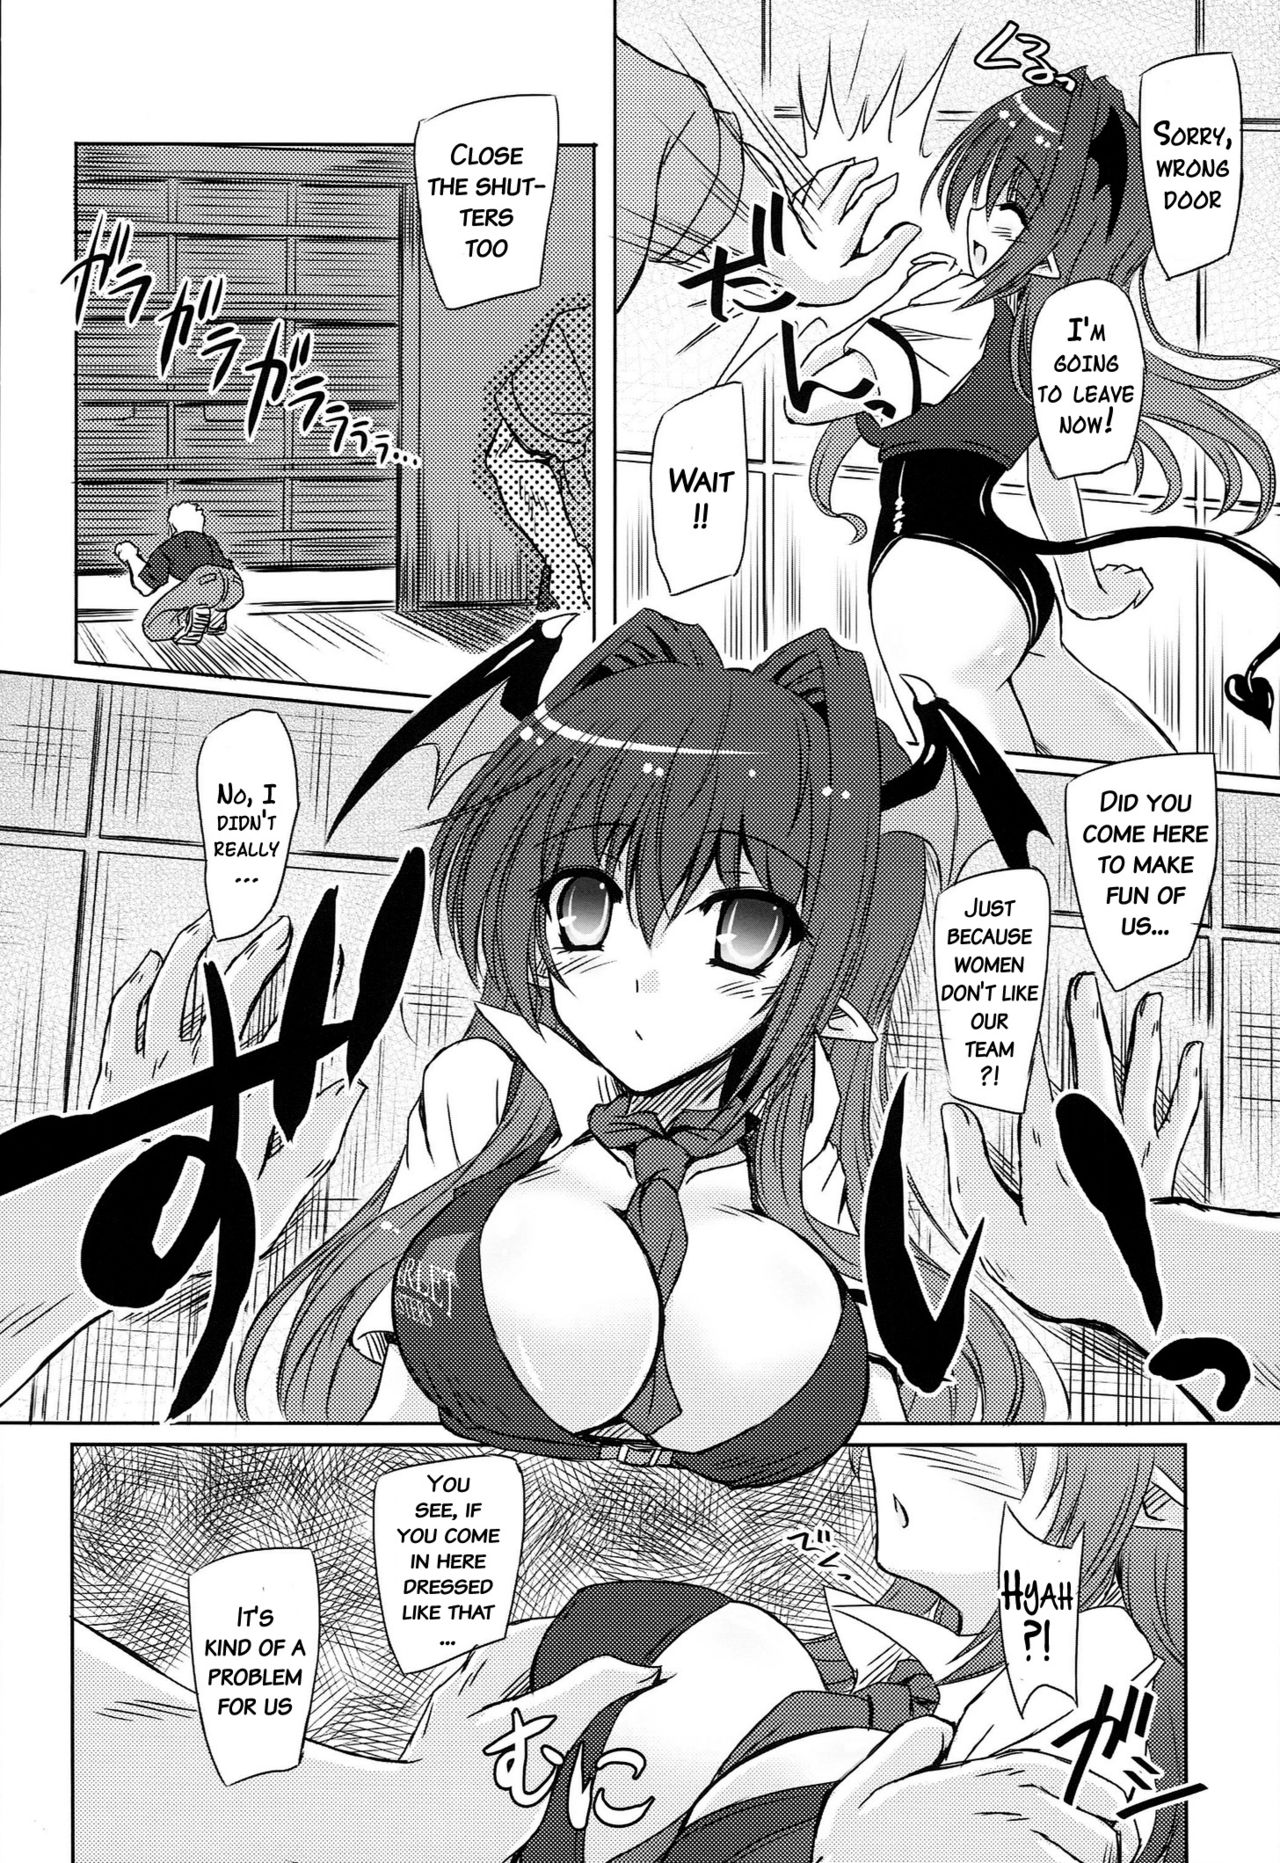 (Reitaisai 11) [TUKIBUTO (Various)] TOUHOU RACE QUEENS COLLABO CLUB -SCARLET SISTERS- (Touhou Project) [English] {doujins.com} page 35 full